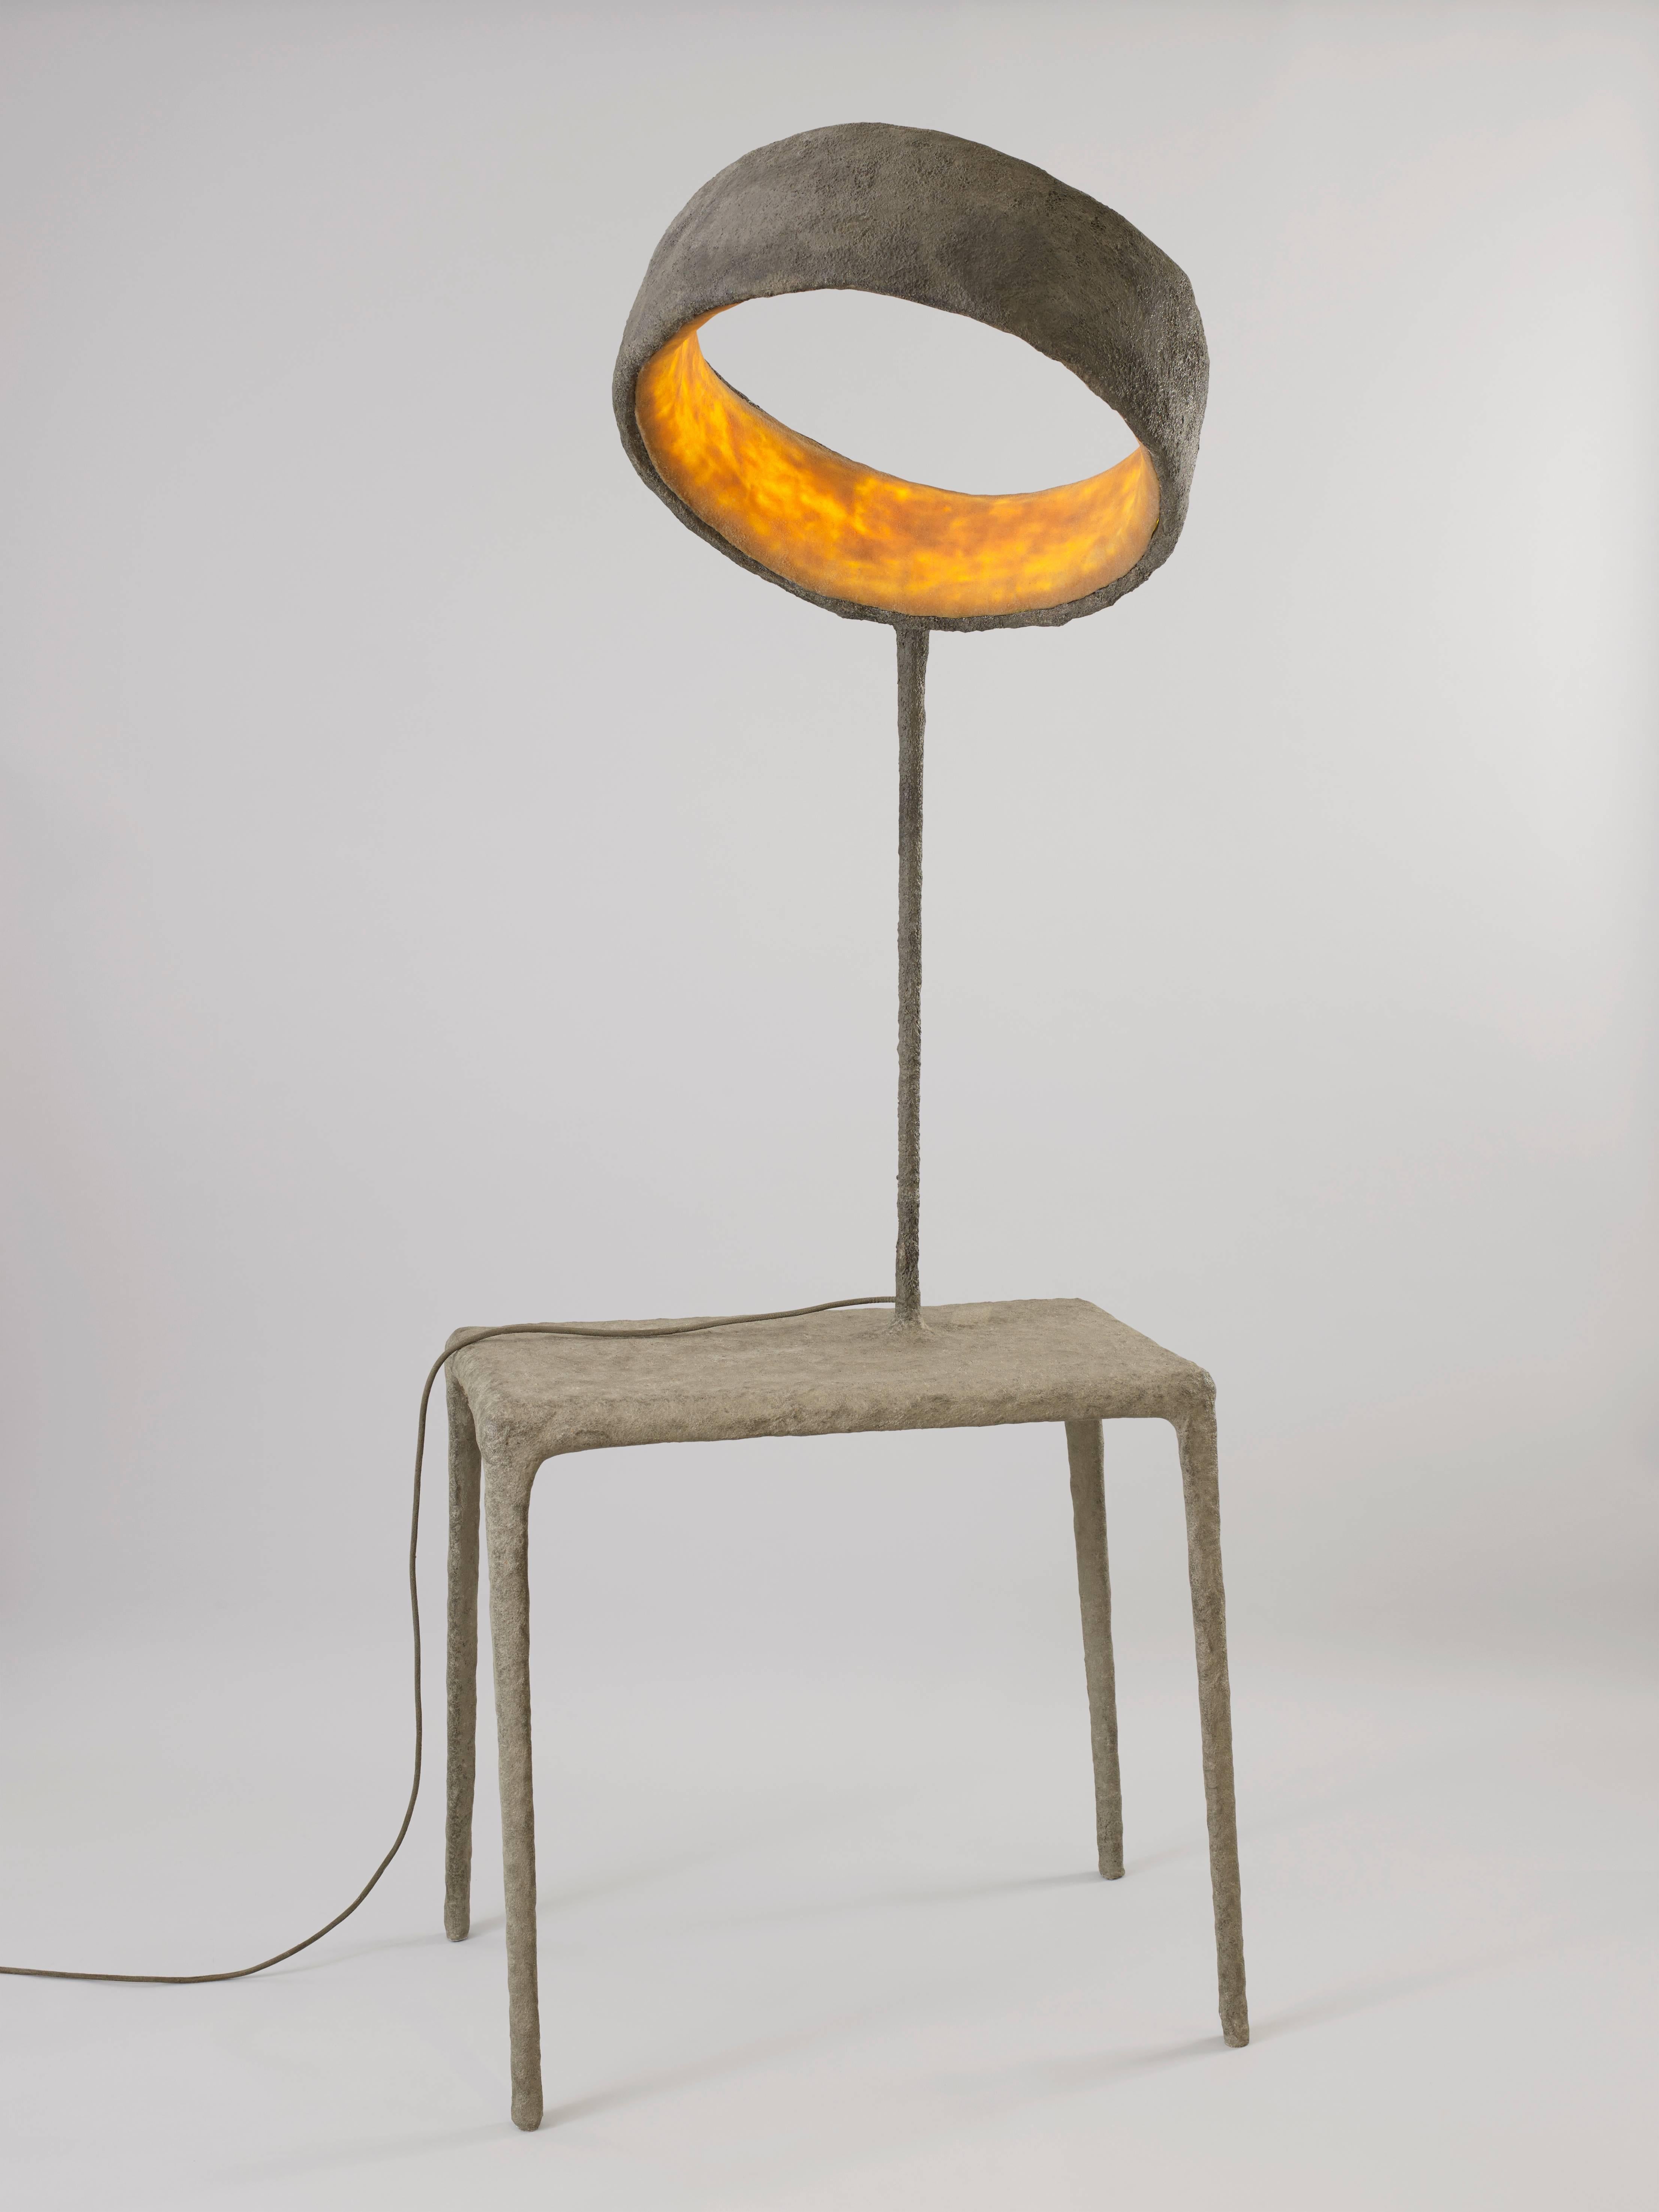 Dutch Orange and Brown ‘Luciferase’ Hybrid Console and Floor Light by Nacho Carbonell